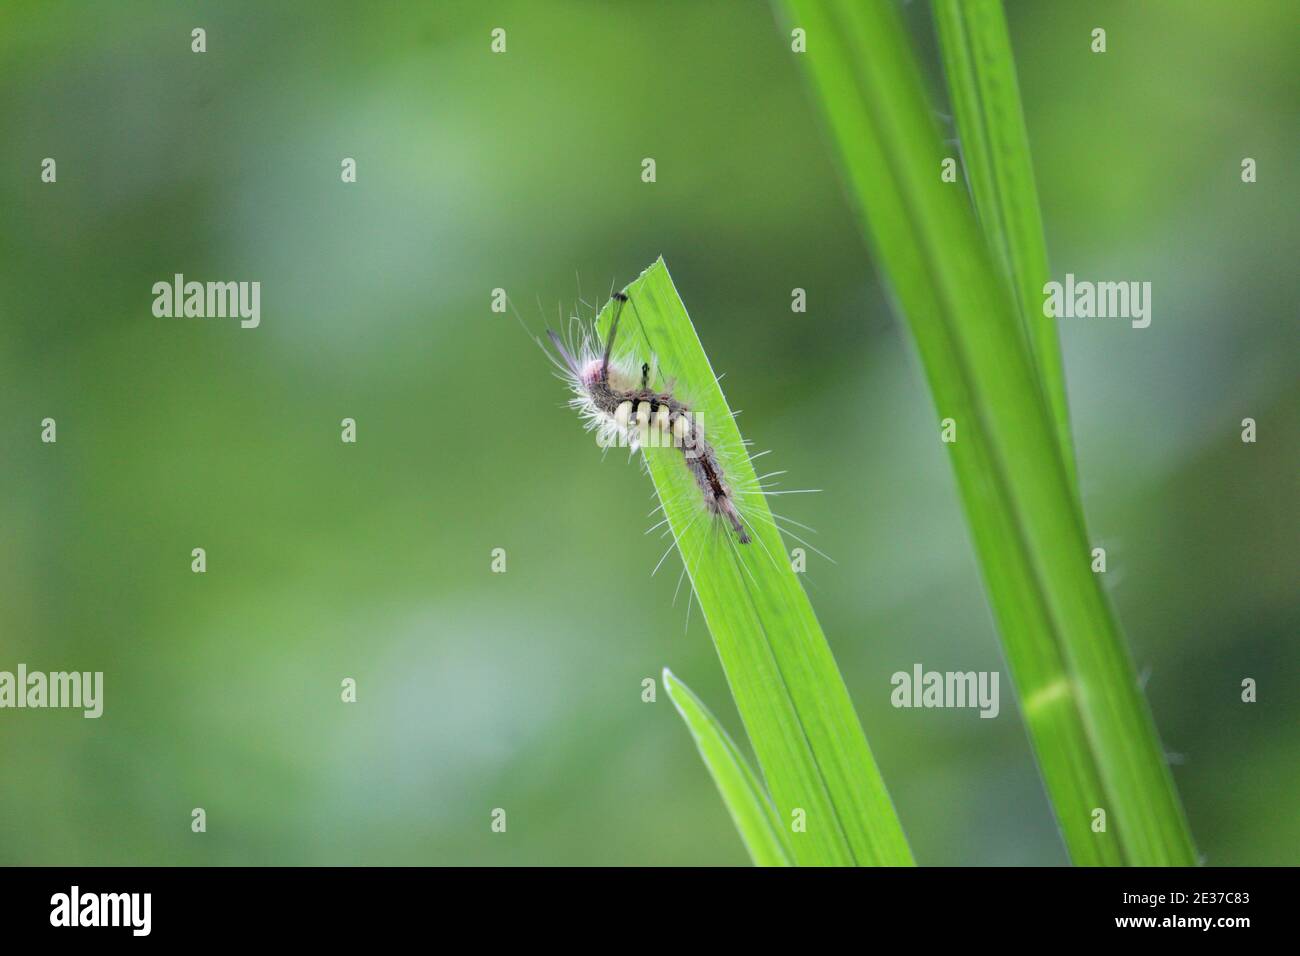 Bug eating the rice leaf wild bug feeding on crop bug damaging crop in agriculture Stock Photo